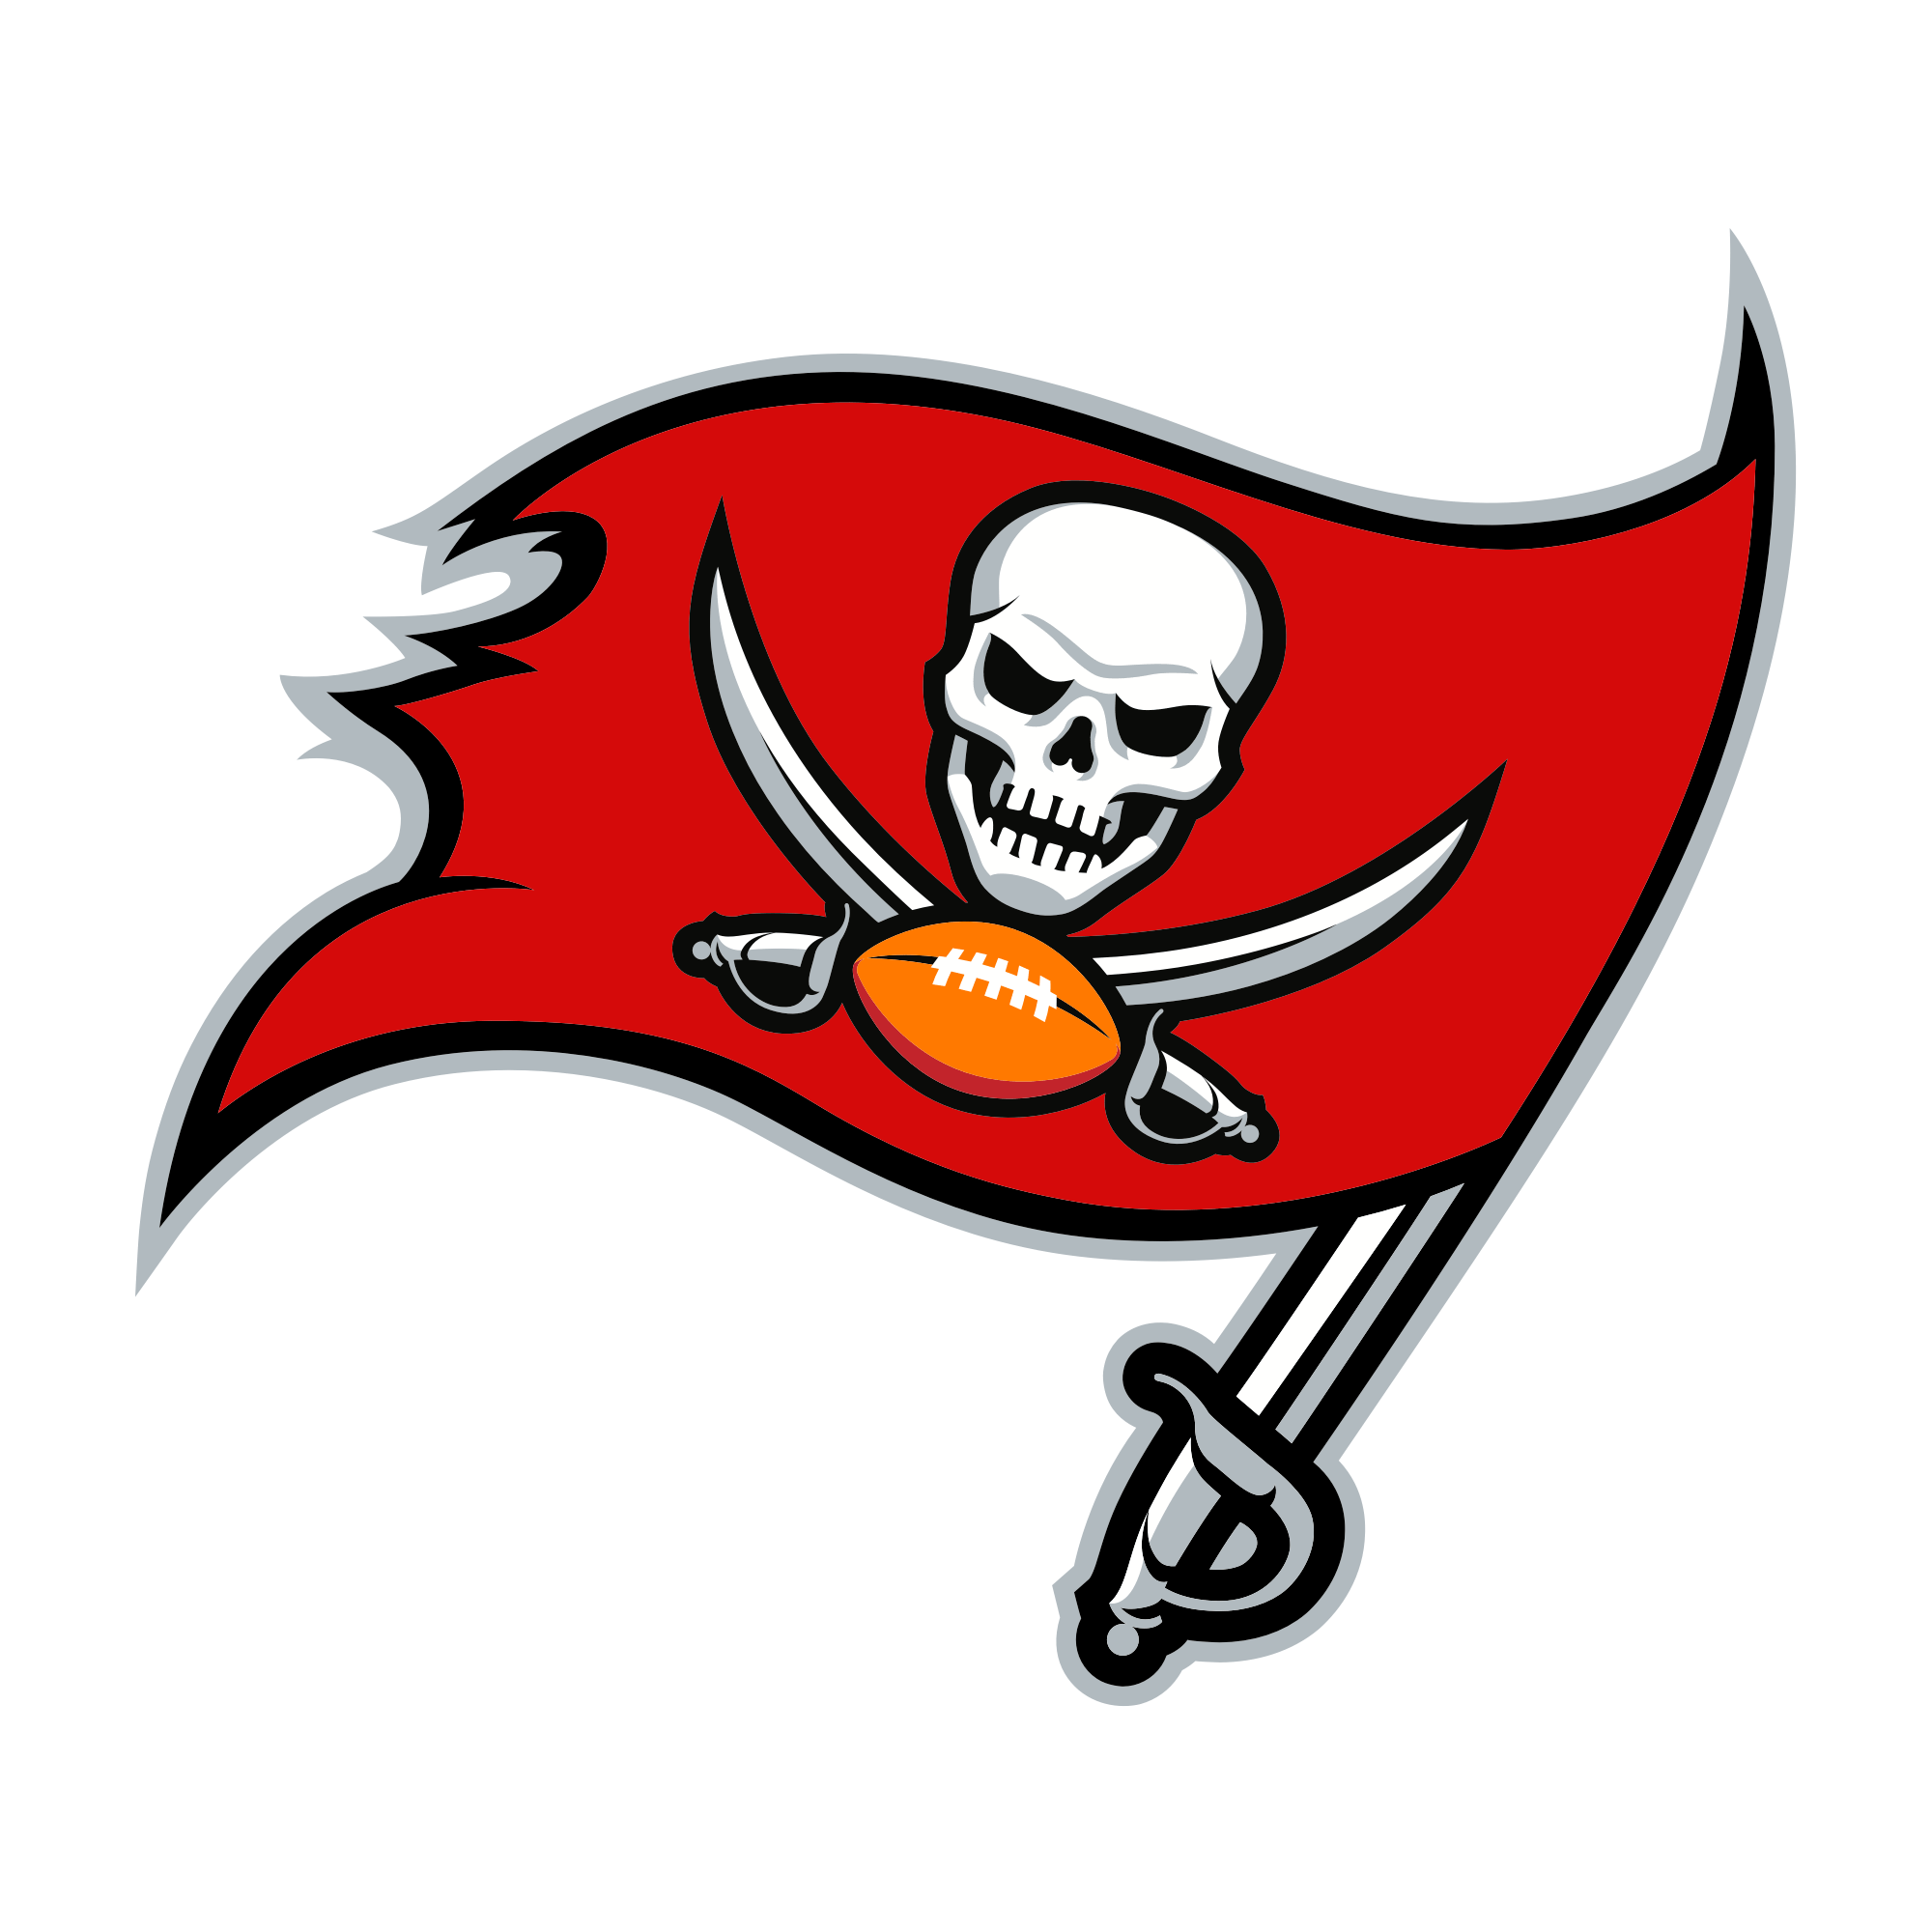 2020 Tampa Bay Buccaneers Odds to Win NFC South, NFC Title & Super Bowl from Bovada